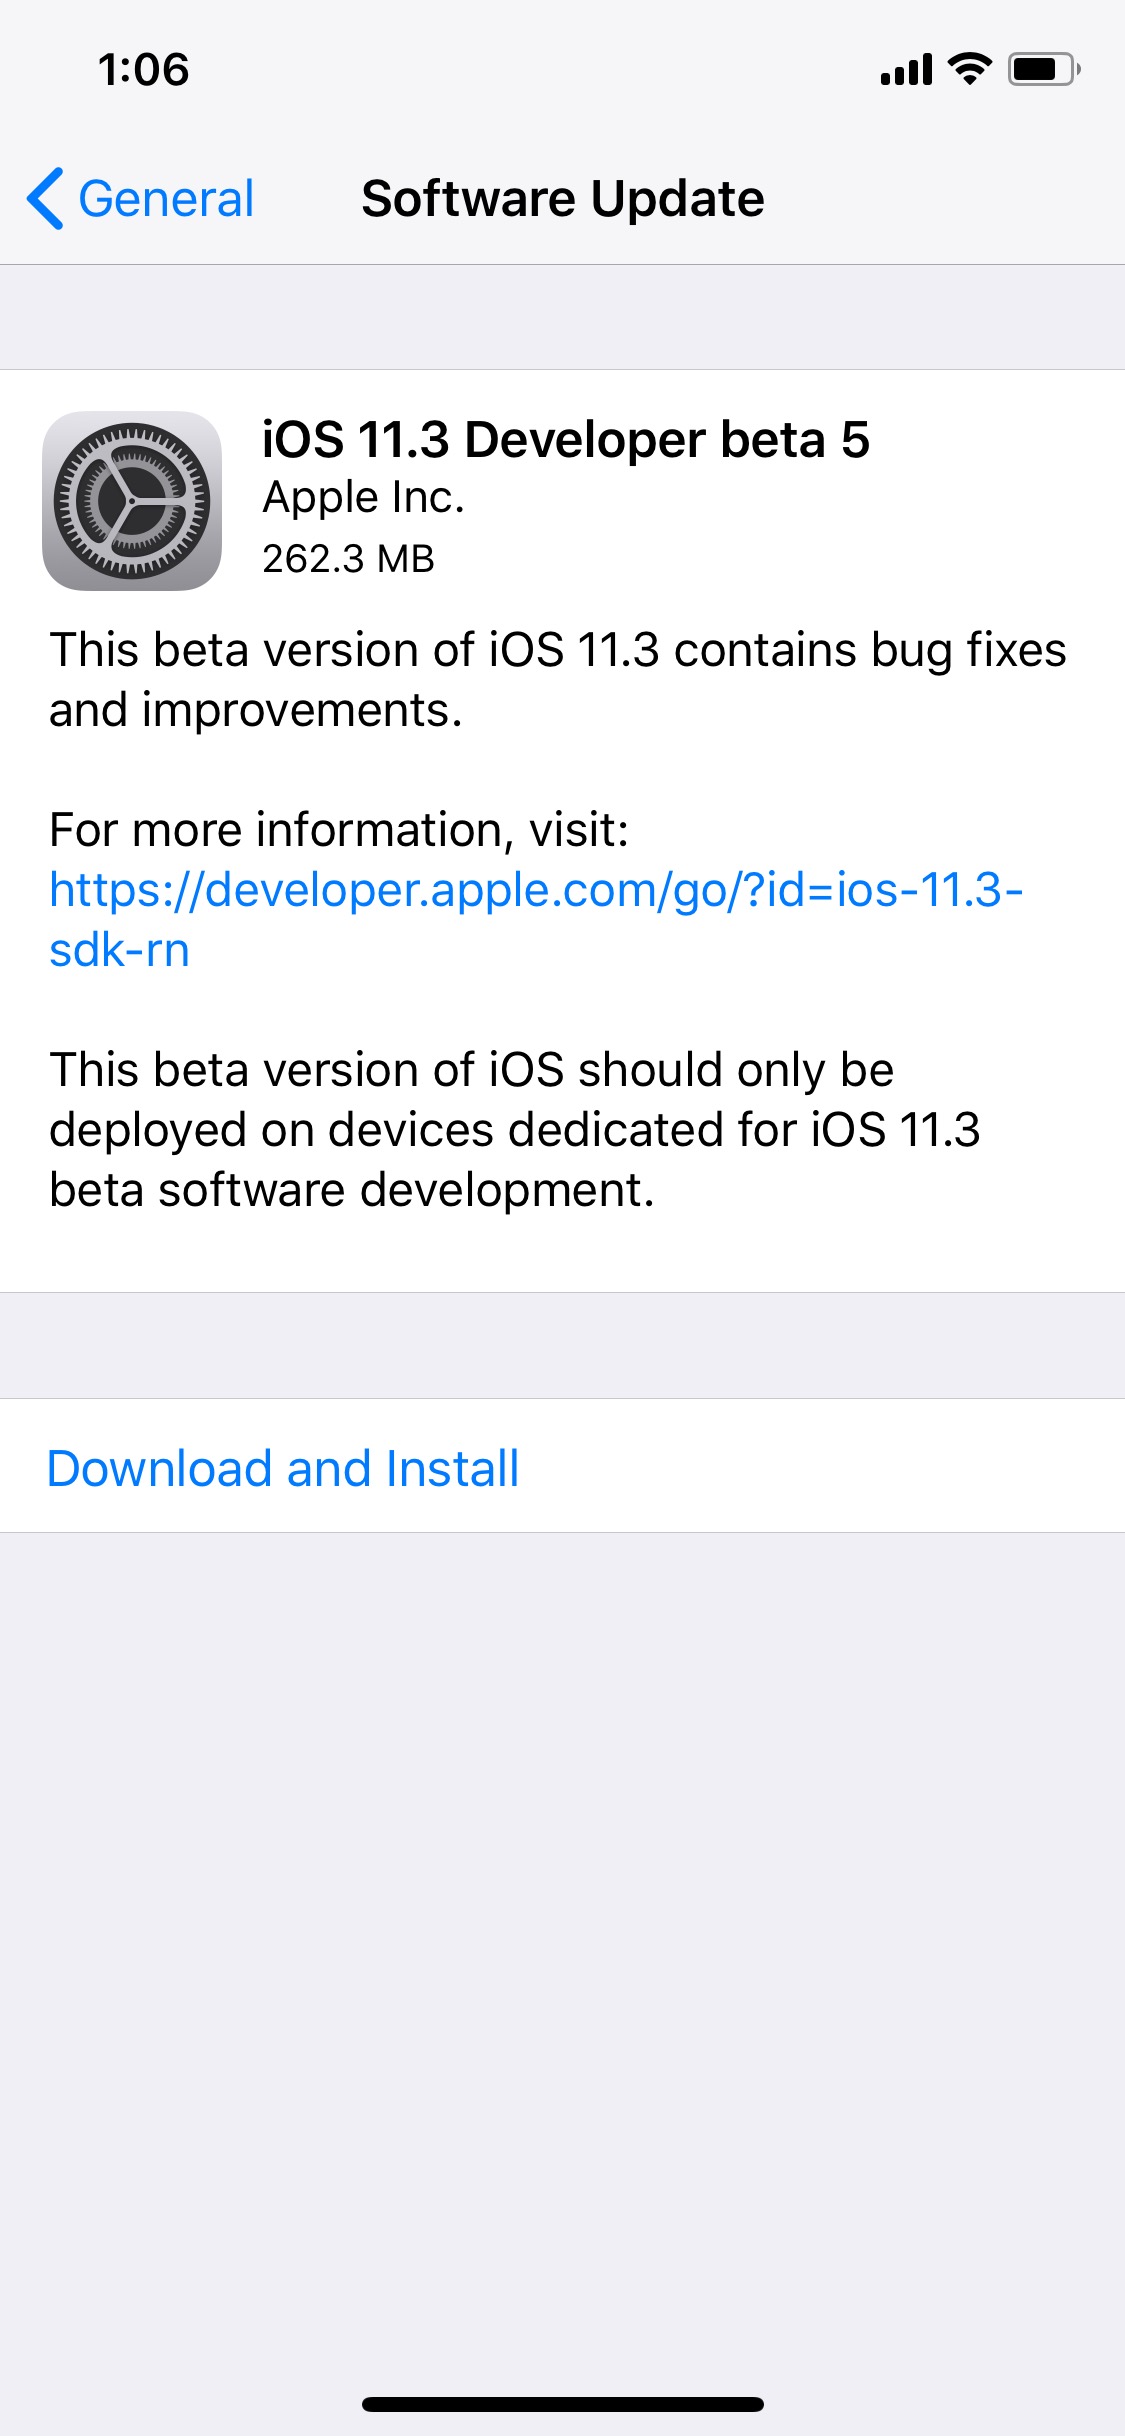 Apple Releases iOS 11.3 Beta 5 to Developers [Download]